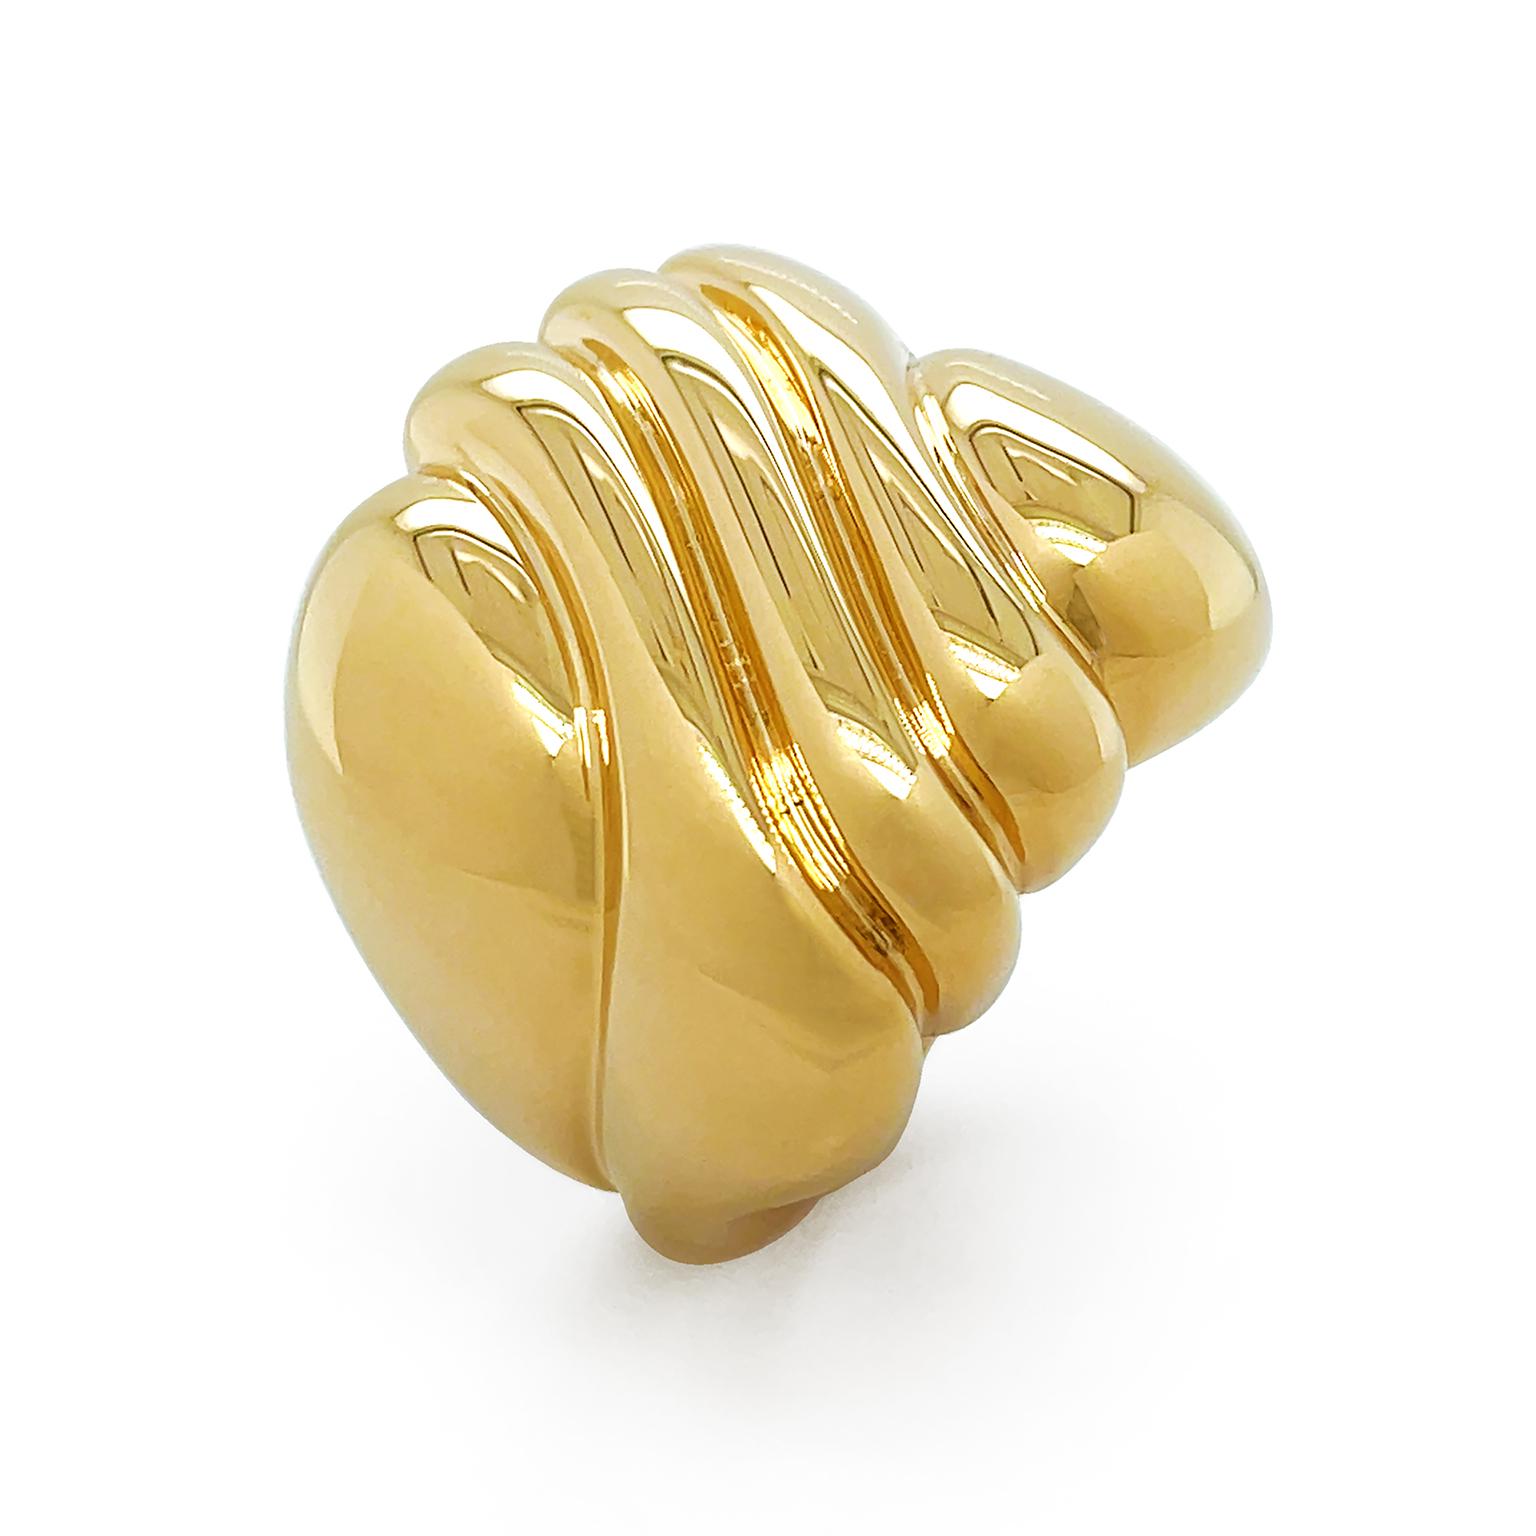 The luminous radiance of polished 18k yellow gold dances across the ring. The sleek metal features a carved asymmetrical pattern of soft waves, giving a sense of motion. Measurements for the ring are 0.875 inches (width) by 0.875 inches (length) by